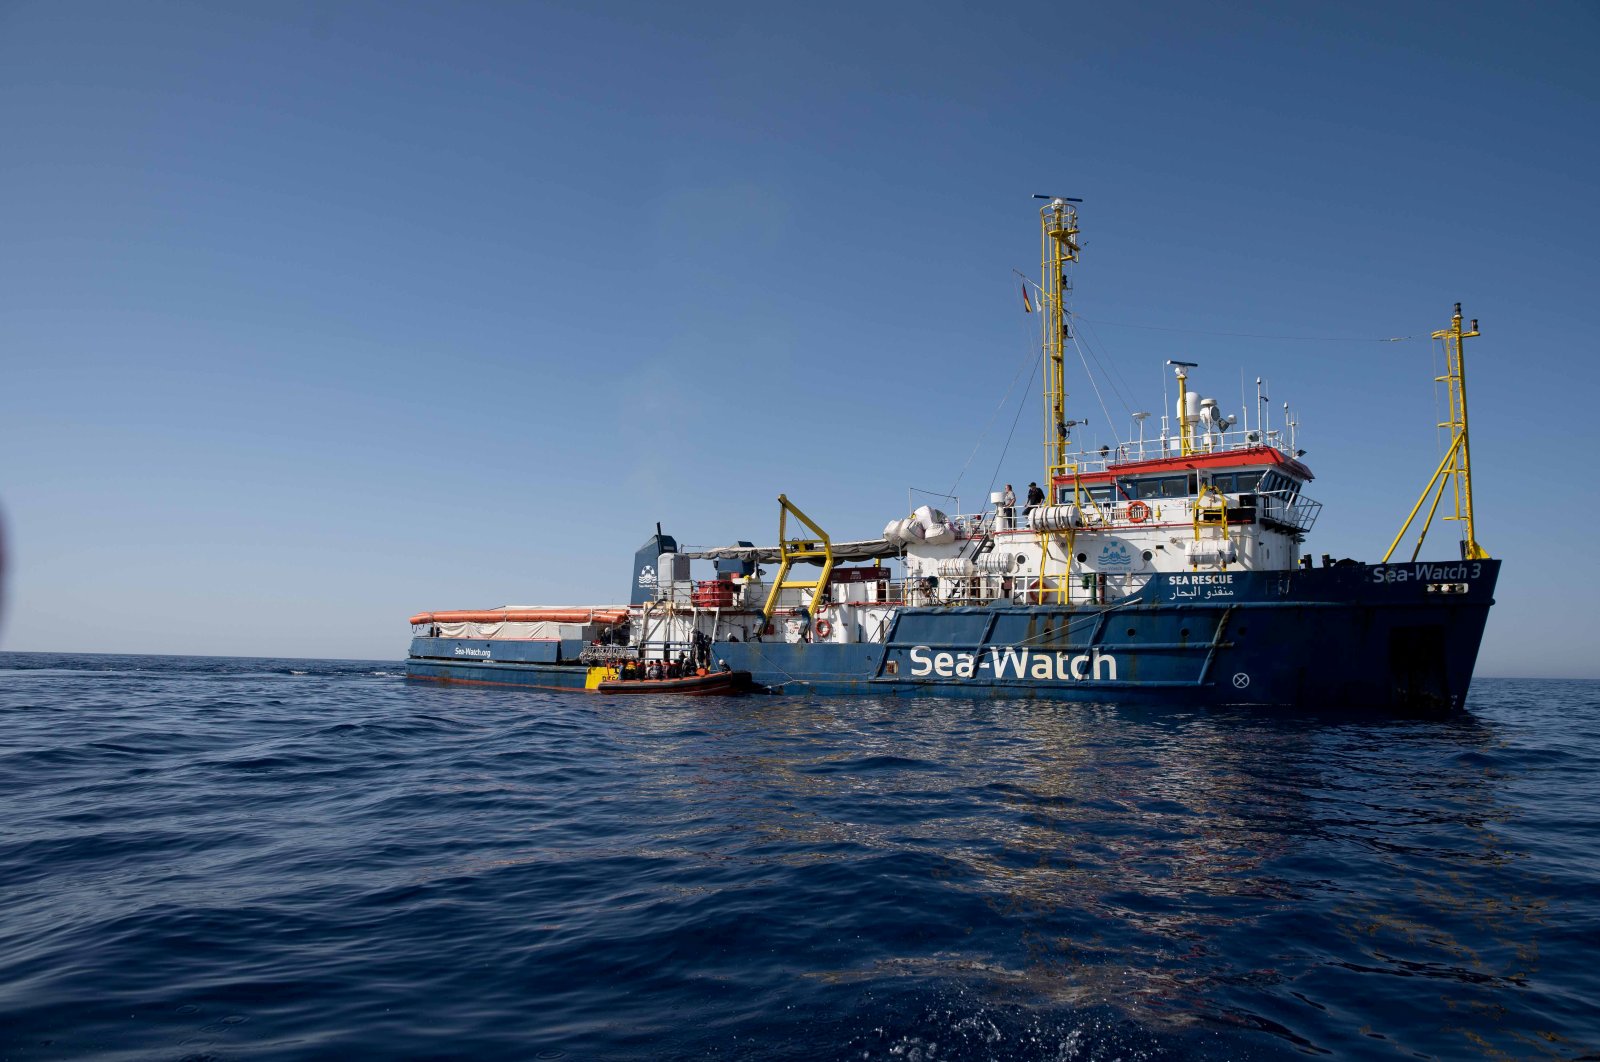 German nongovernmental search and rescue ship Sea-Watch 3 is seen at sea during a search and rescue (SAR) operation in the Mediterranean Sea, off the Libyan coast, June 17, 2020. (Sea Watch / Handout via Reuters)